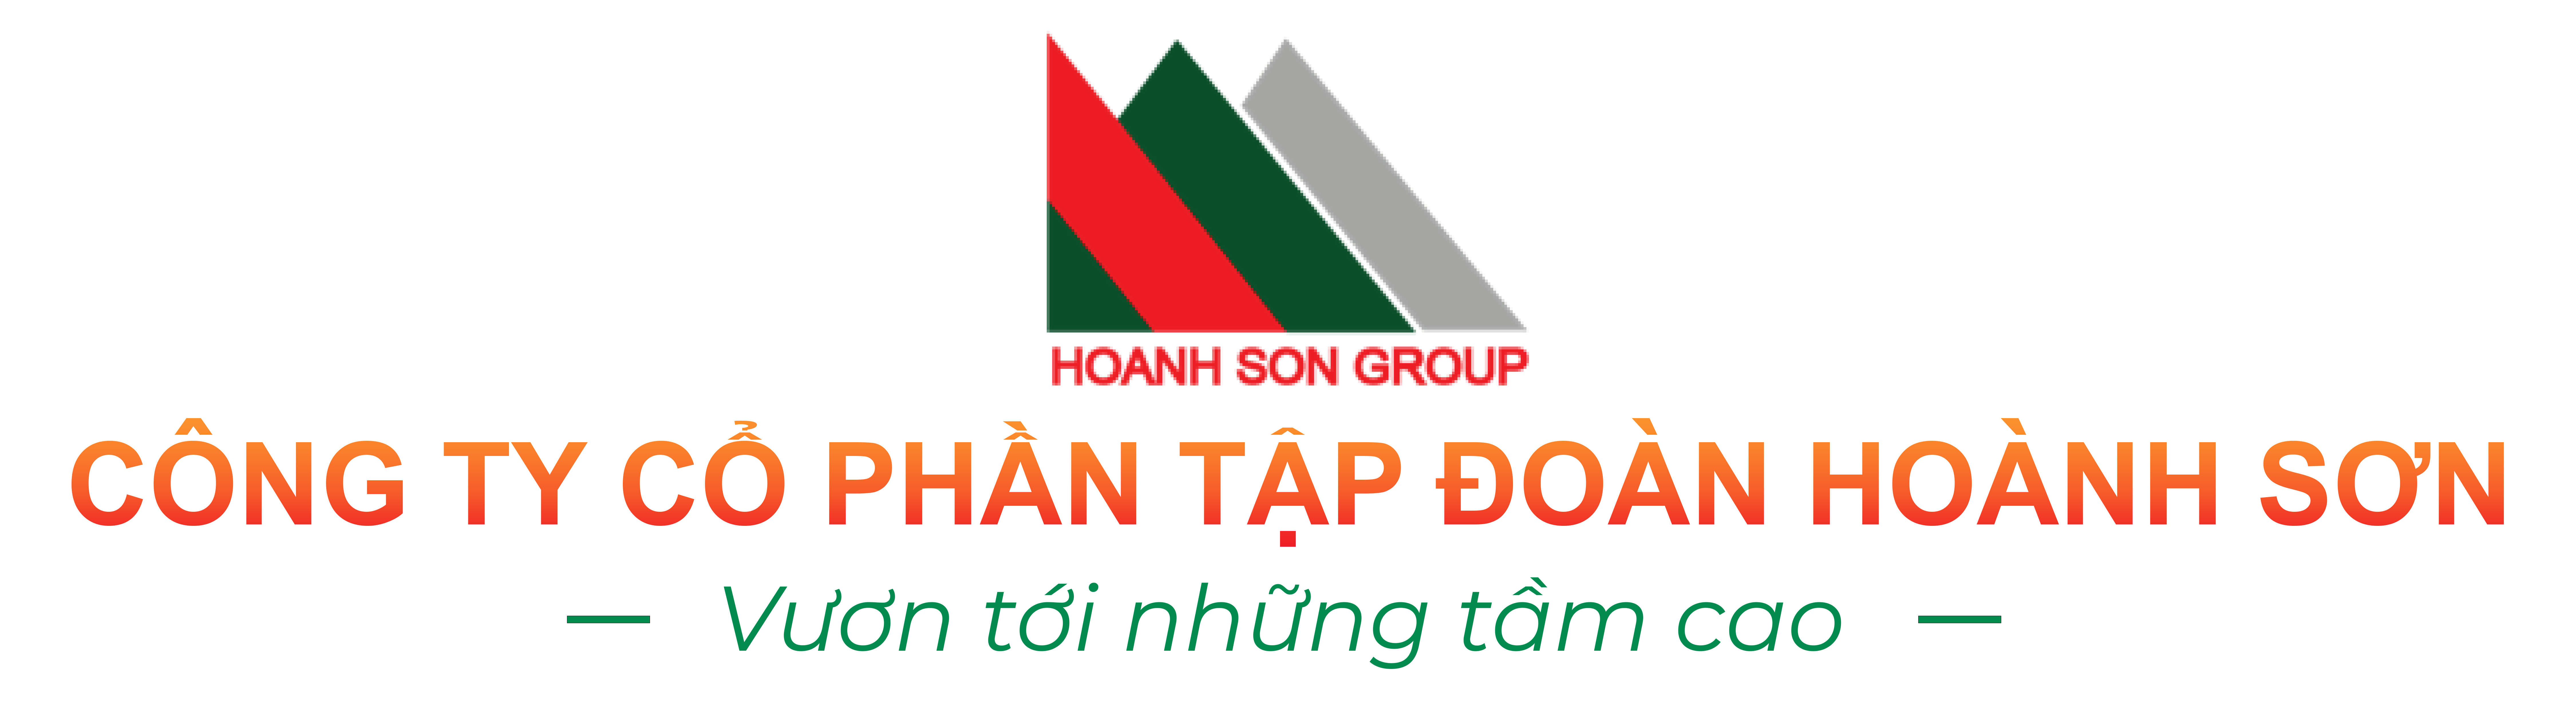 Cover image for Hoành Sơn